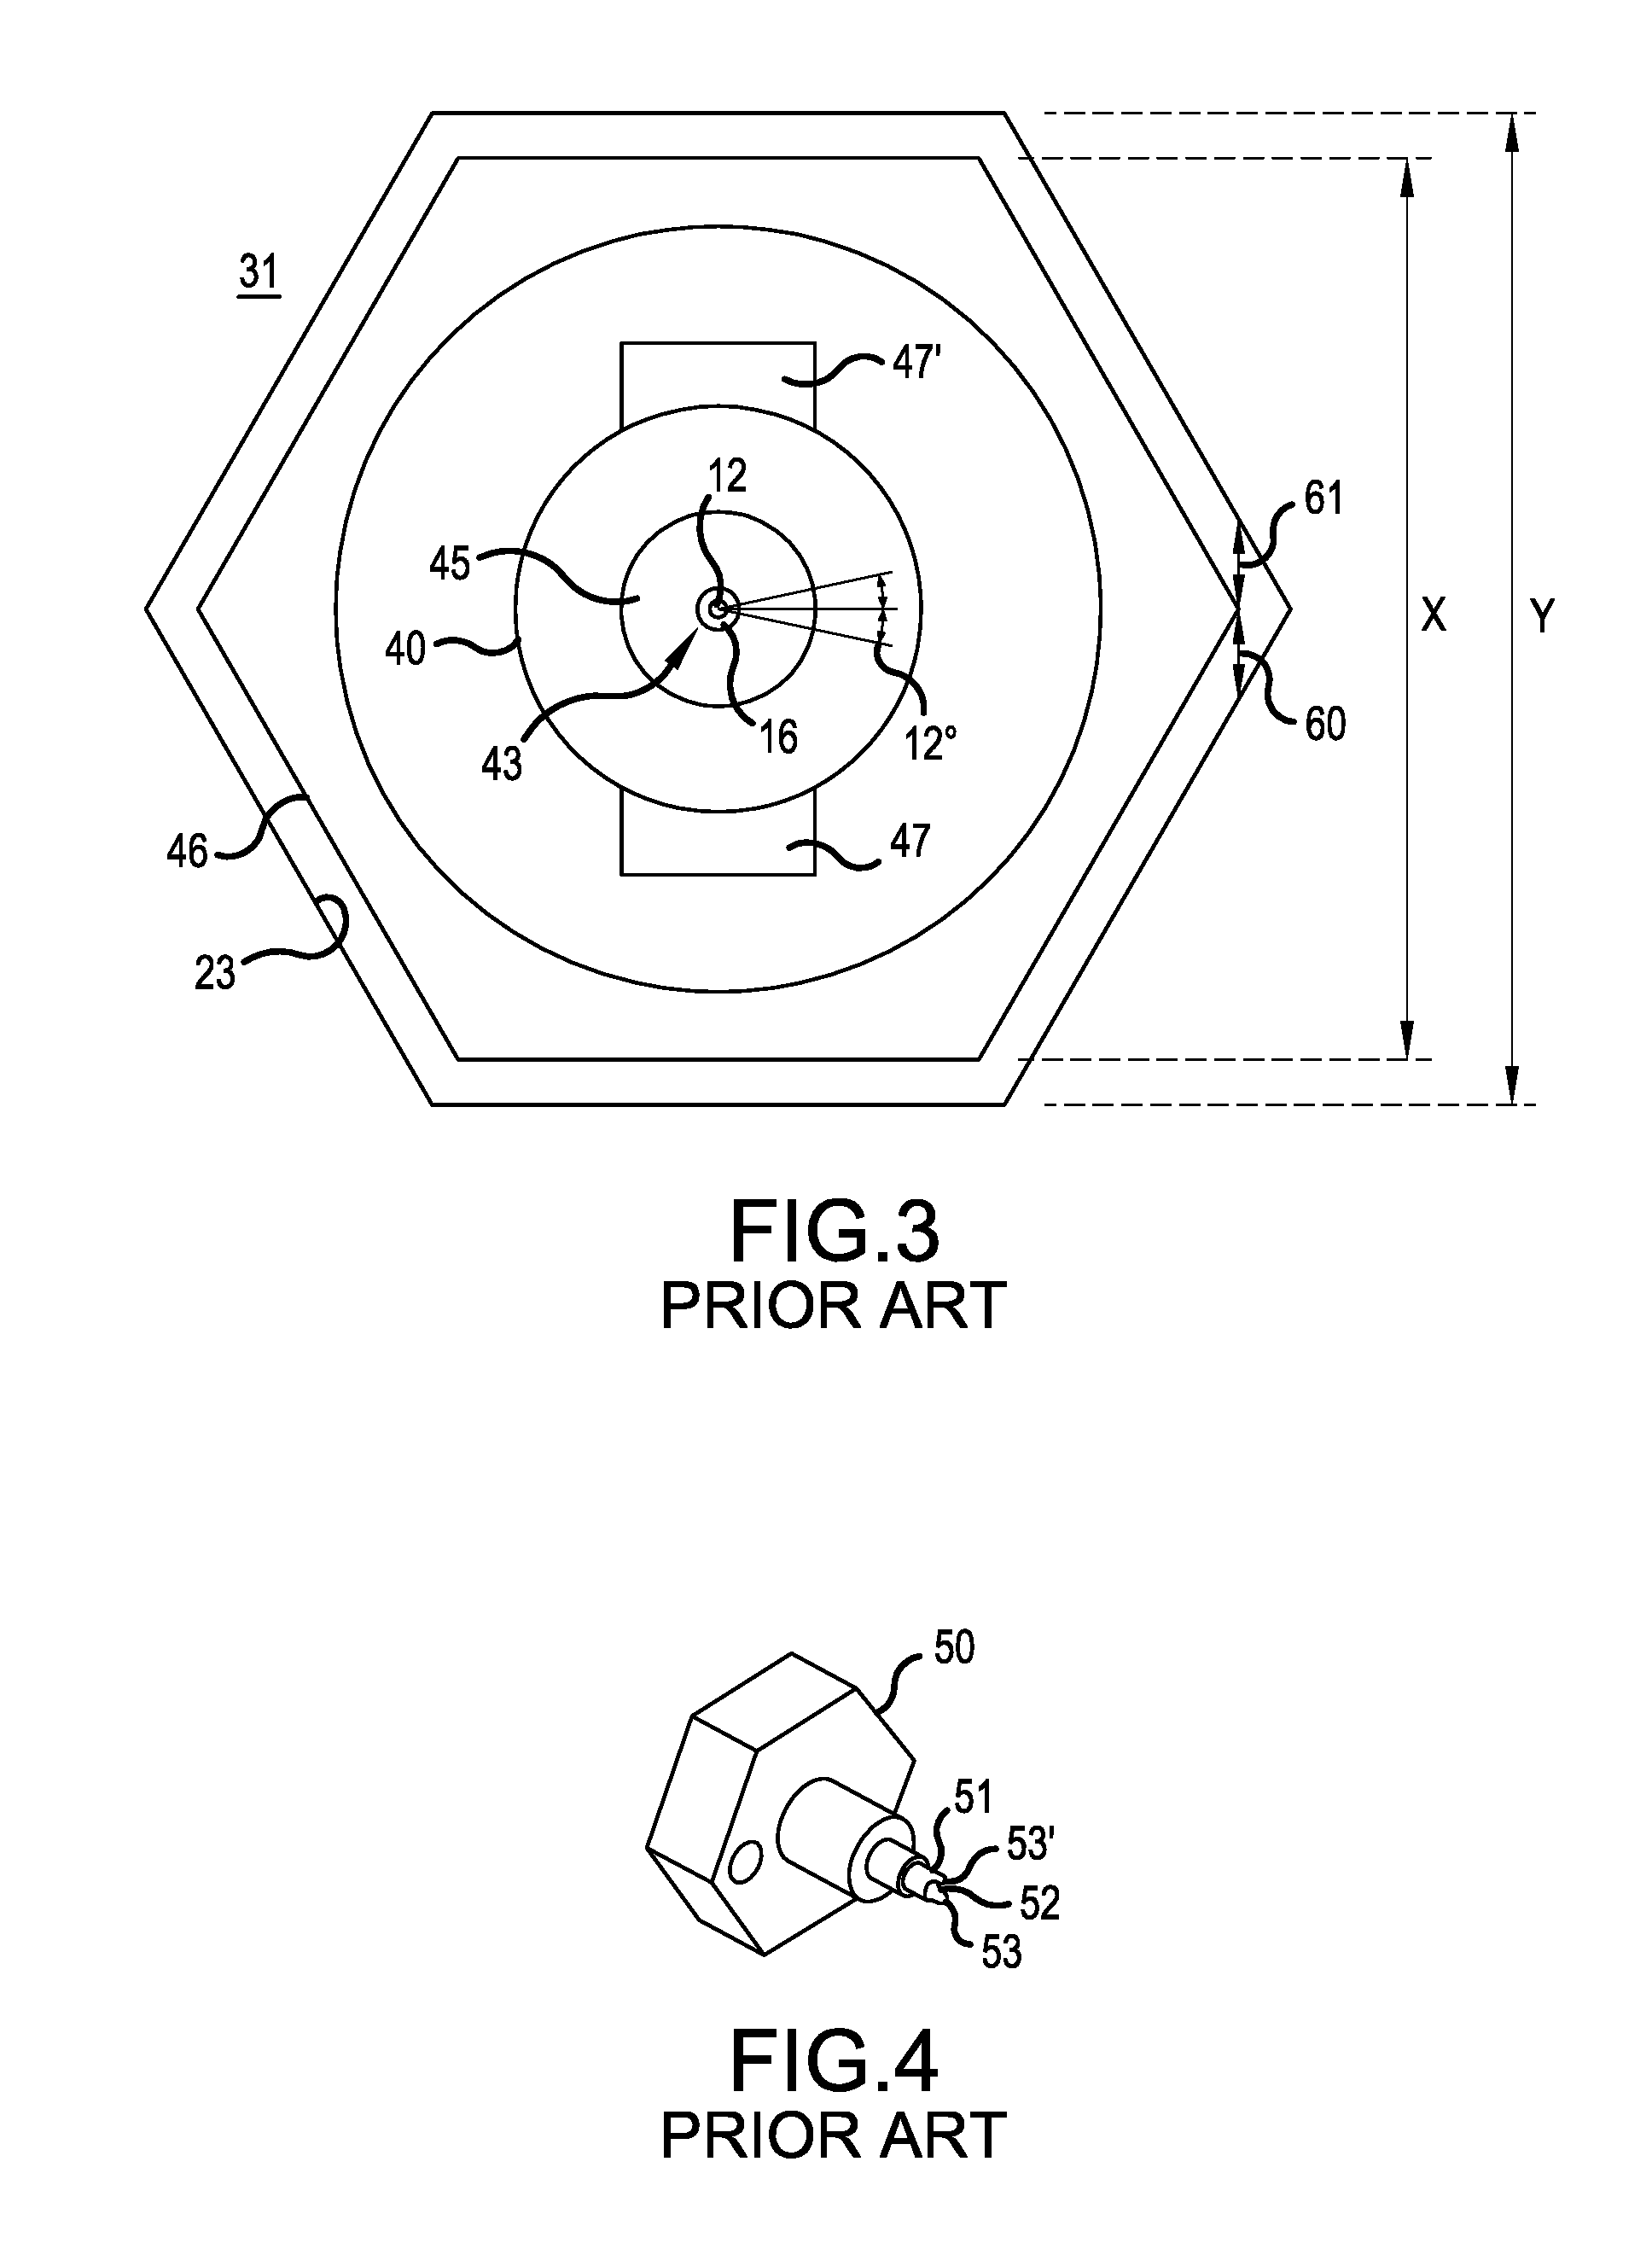 Connector for multiple core optical fiber